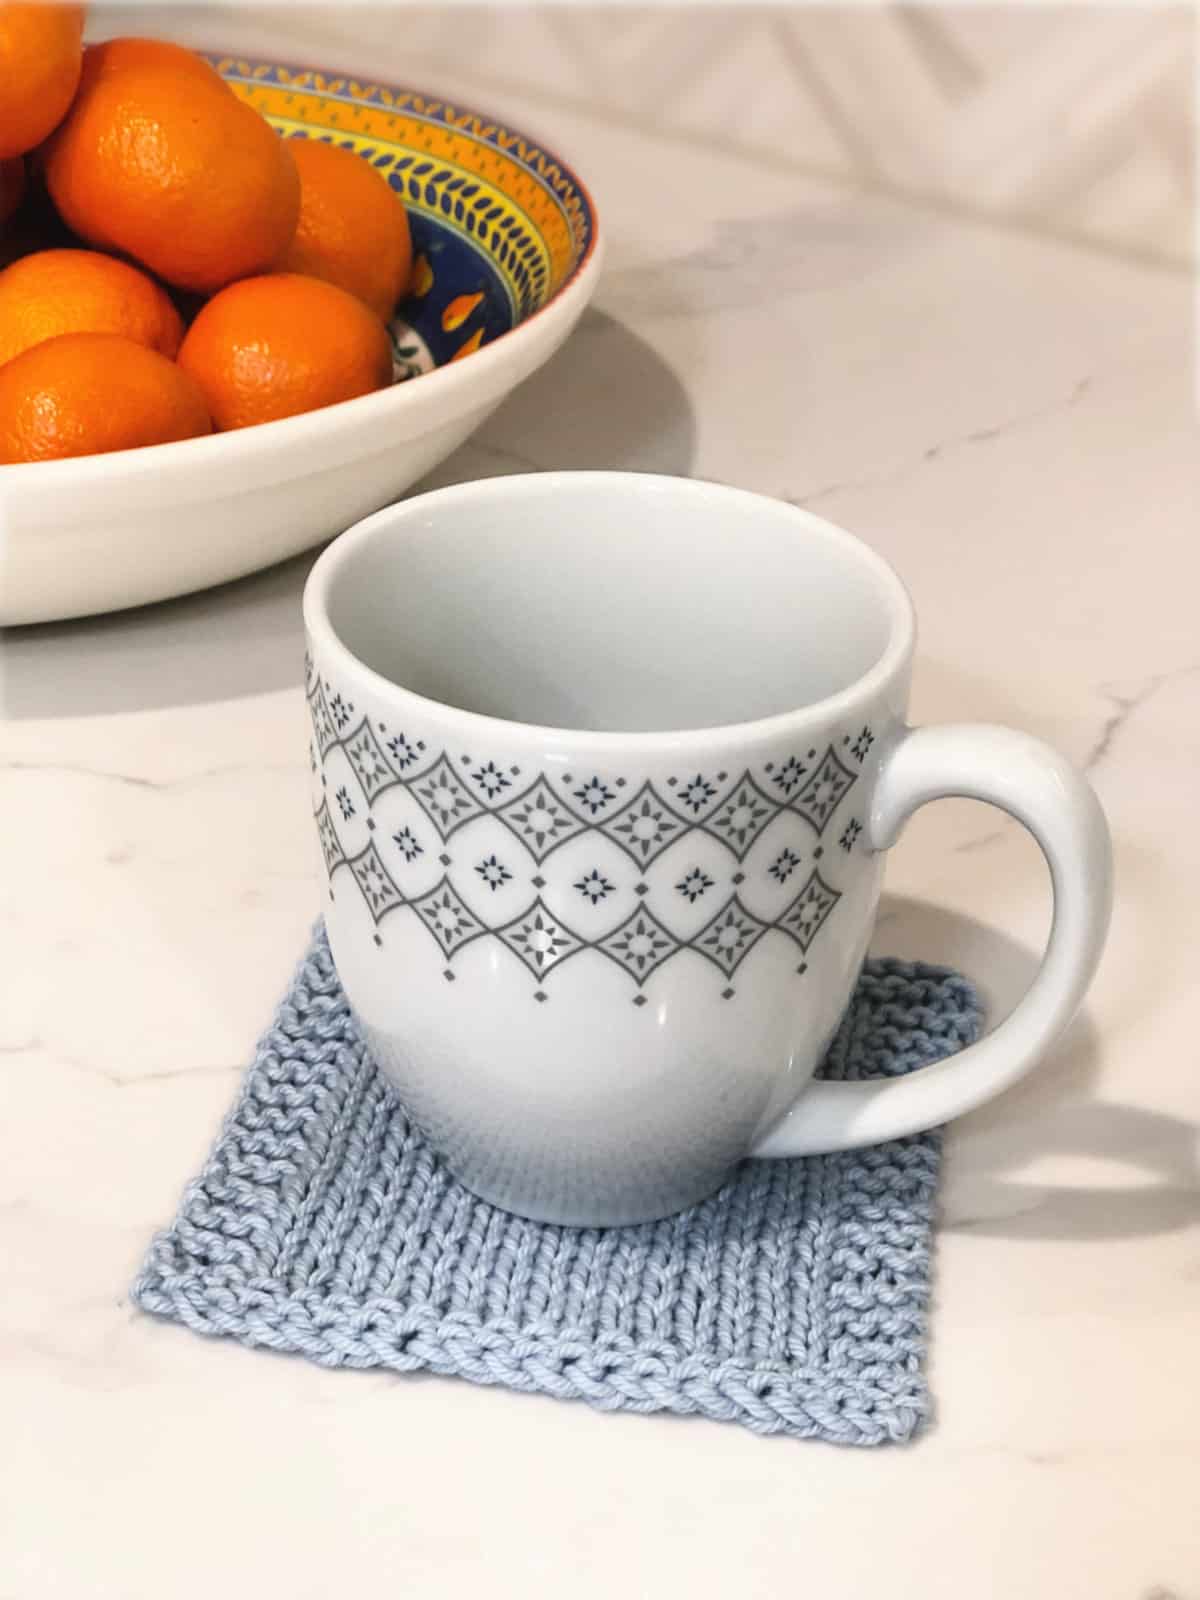 White coffee cup with geometric design in grey on pale blue knit coaster next to bowl or clementines.